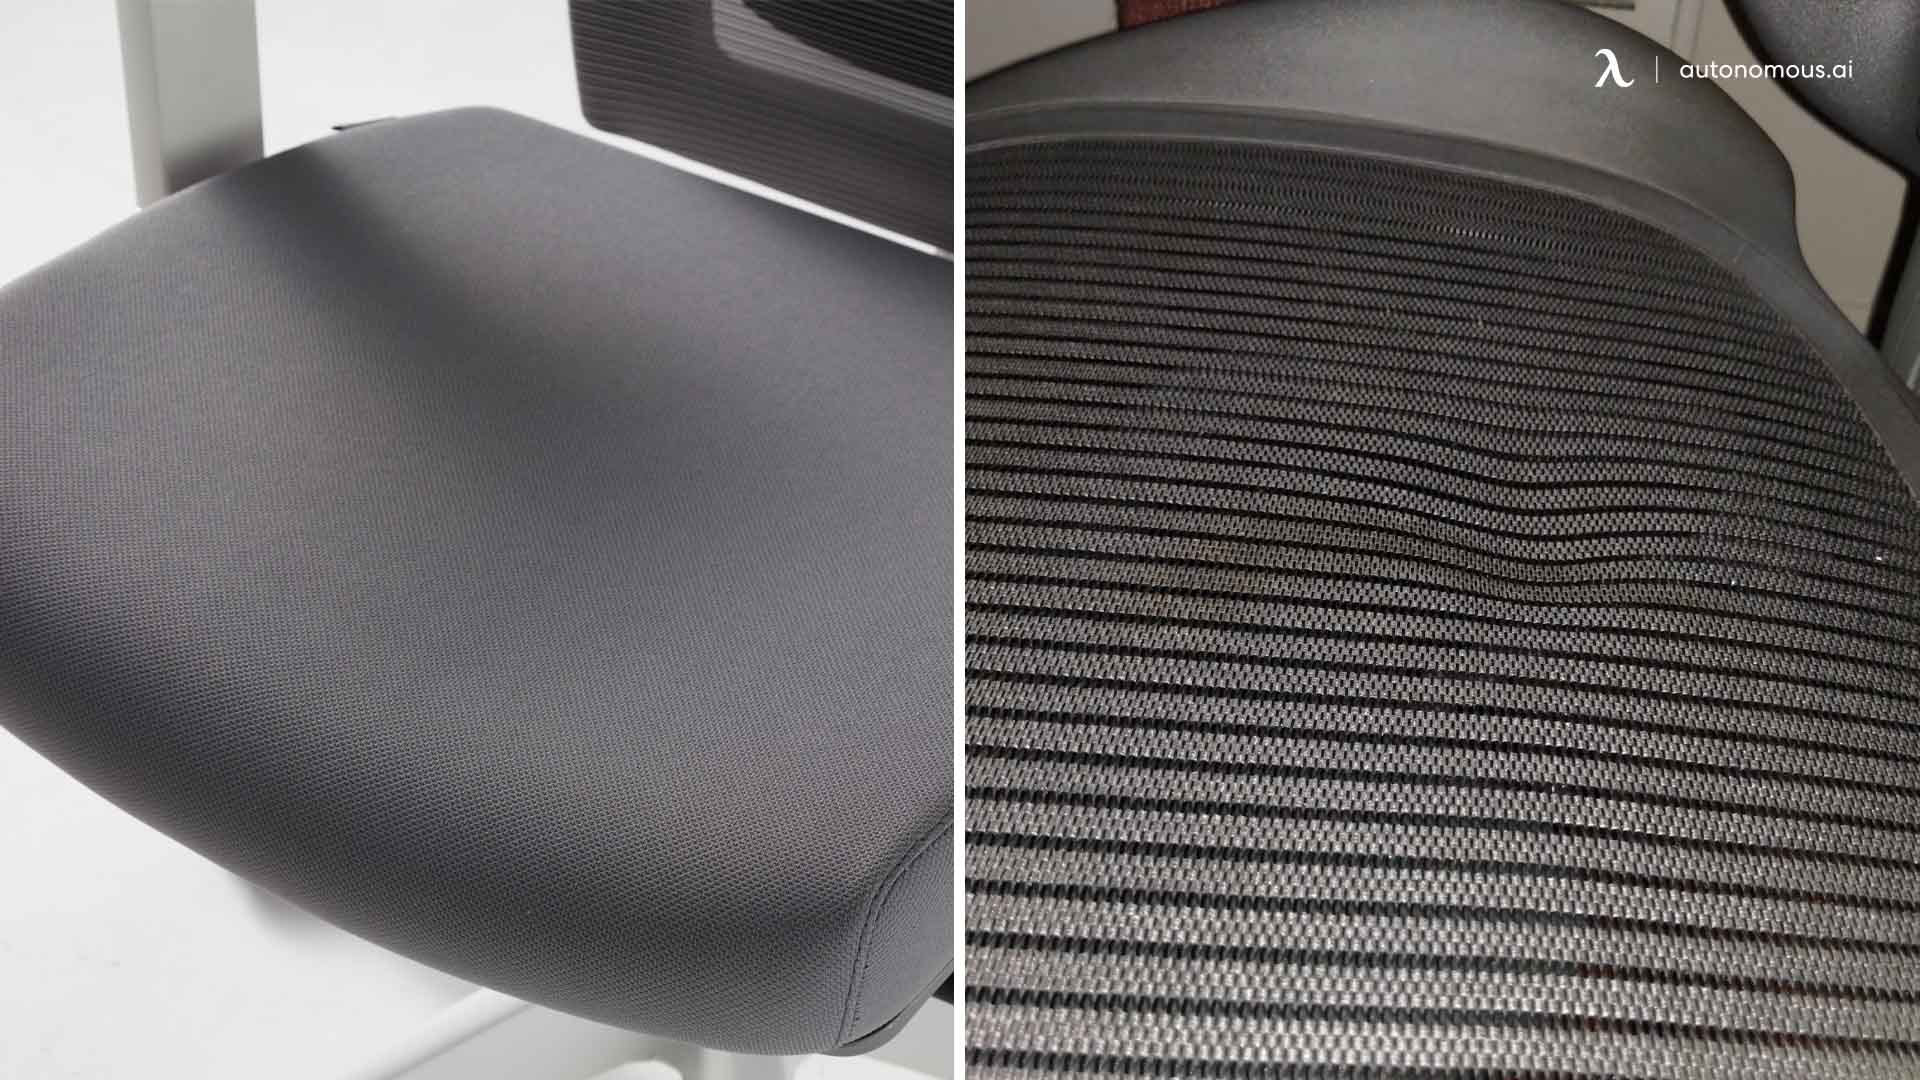 inexpensive office chair Padding